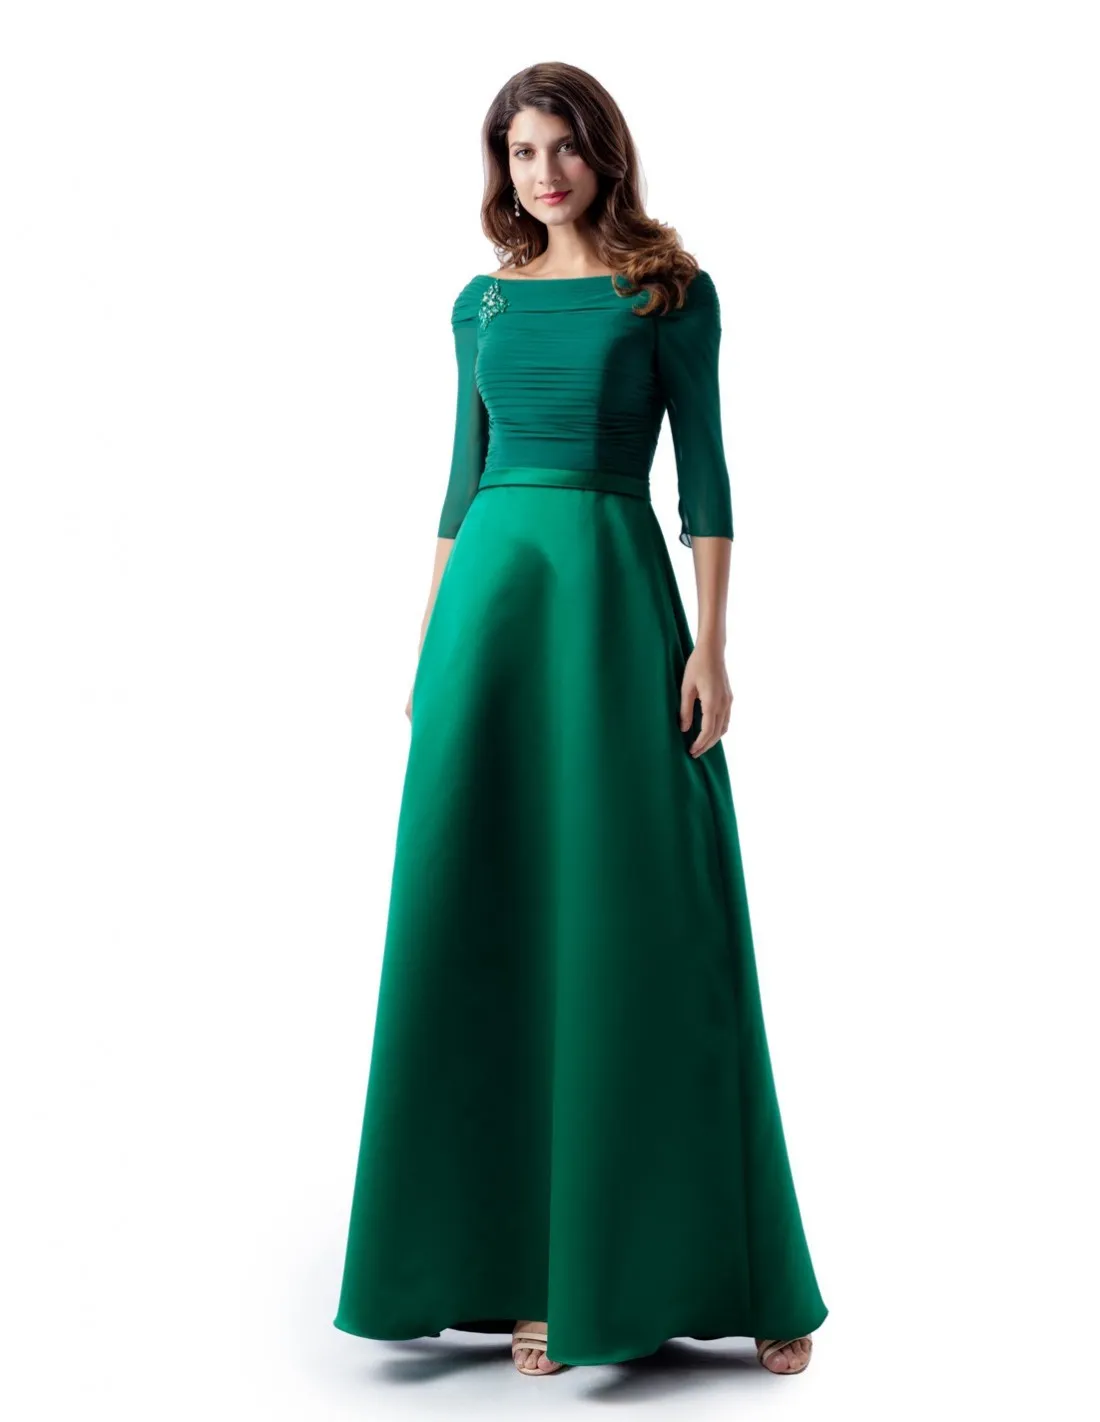 New A-line Green Long Modest Mother of the Bride Dresses With 3/4 Sleeves Chiffon Satin Floor Length Mother's Formal Evening Wear